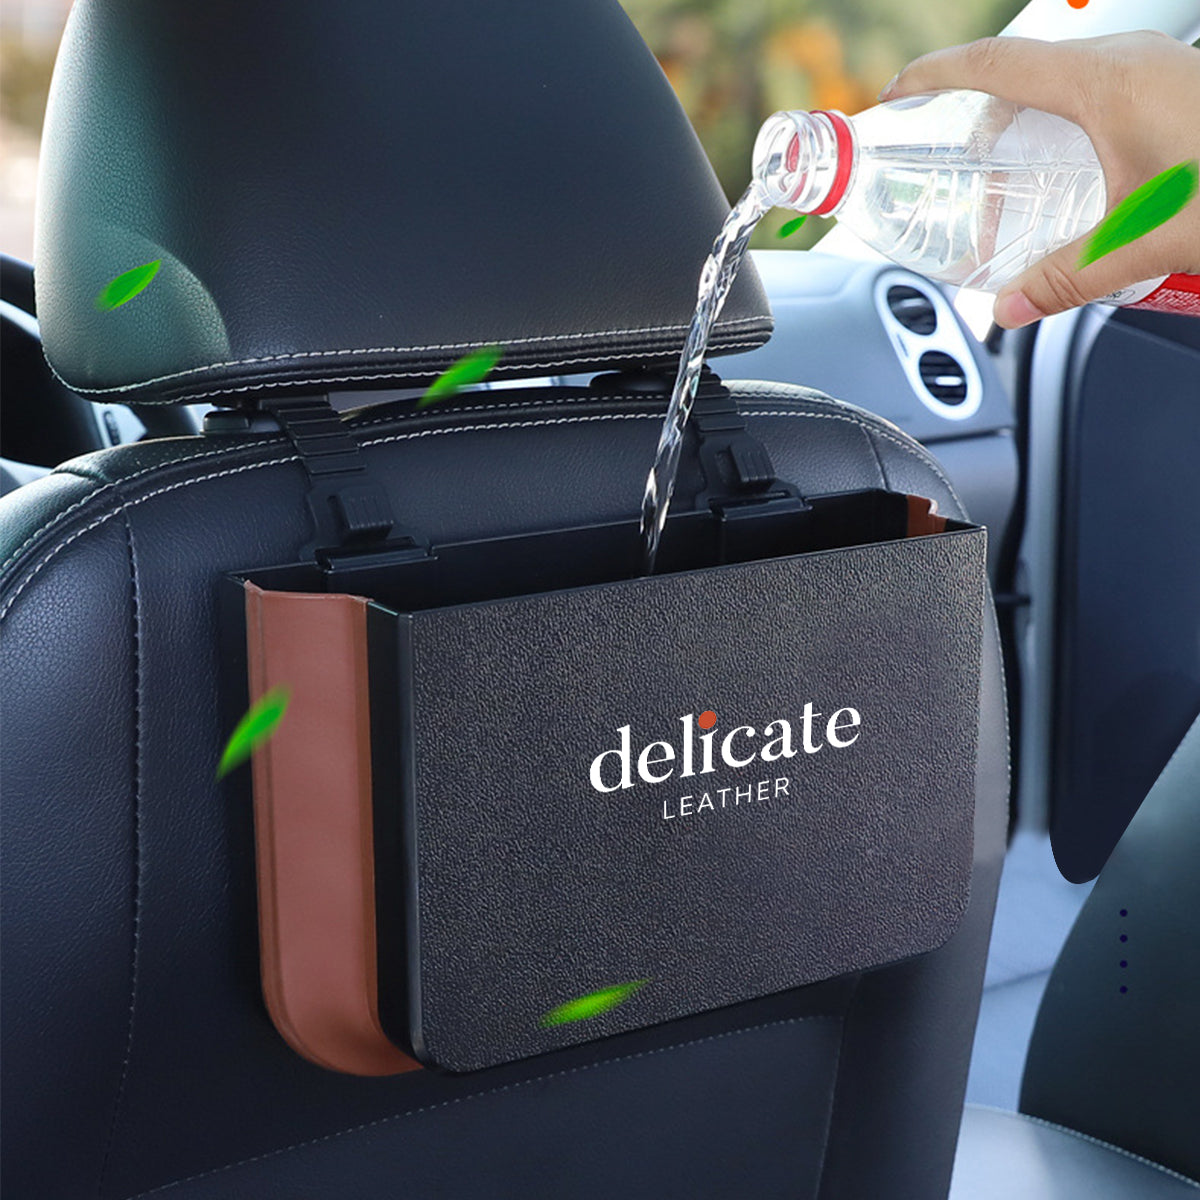 Delicate Leather Hanging Waterproof Car Trash can-Foldable, Custom For Your Cars, Waterproof, and Equipped with Cup Holders and Trays. Multi-Purpose, Car Accessories CC11992